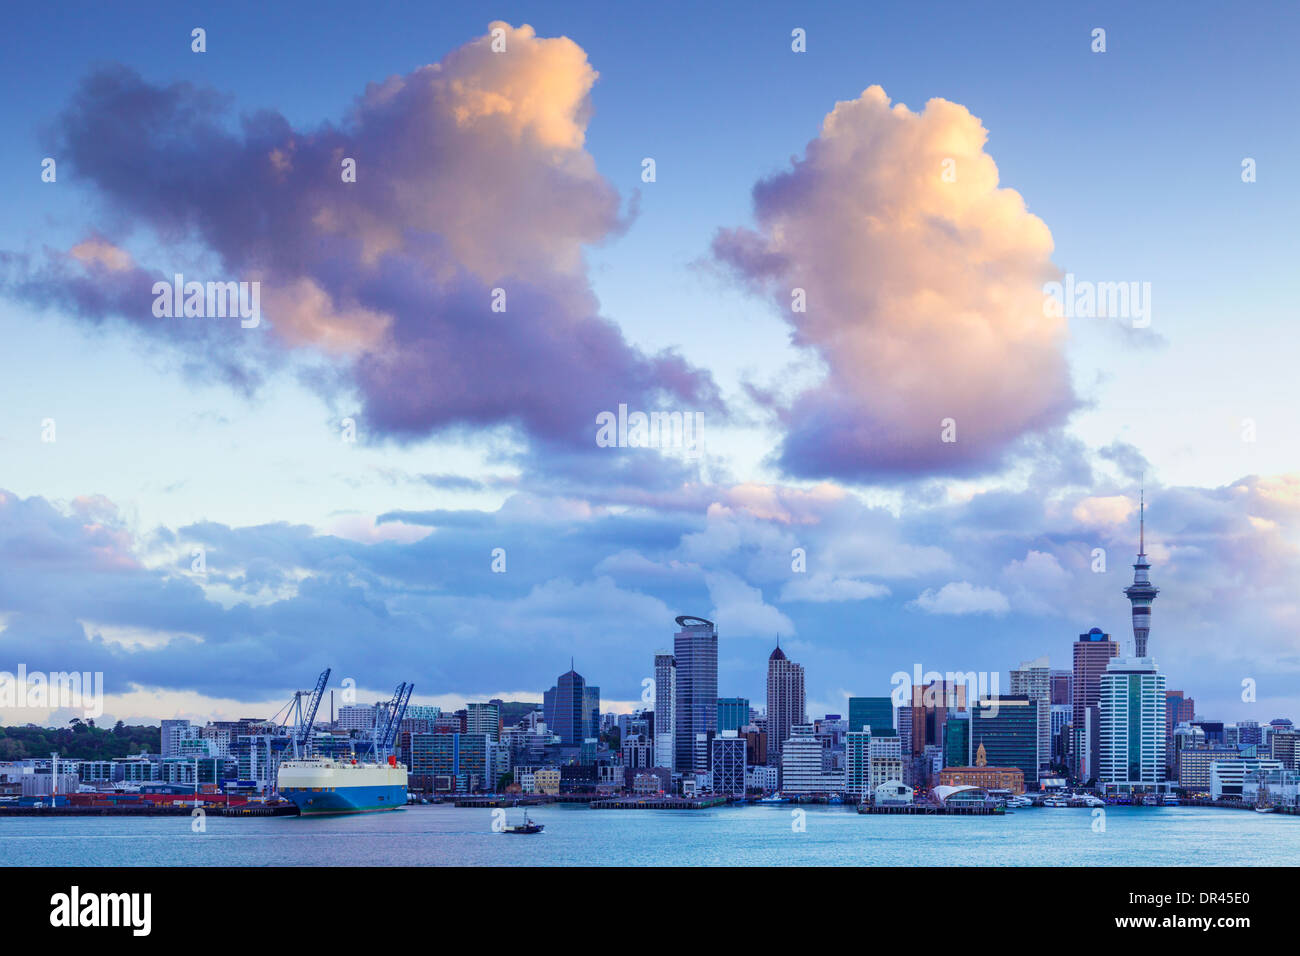 Auckland Skyline at twilight, with dramatic sunlit clouds. Stock Photo